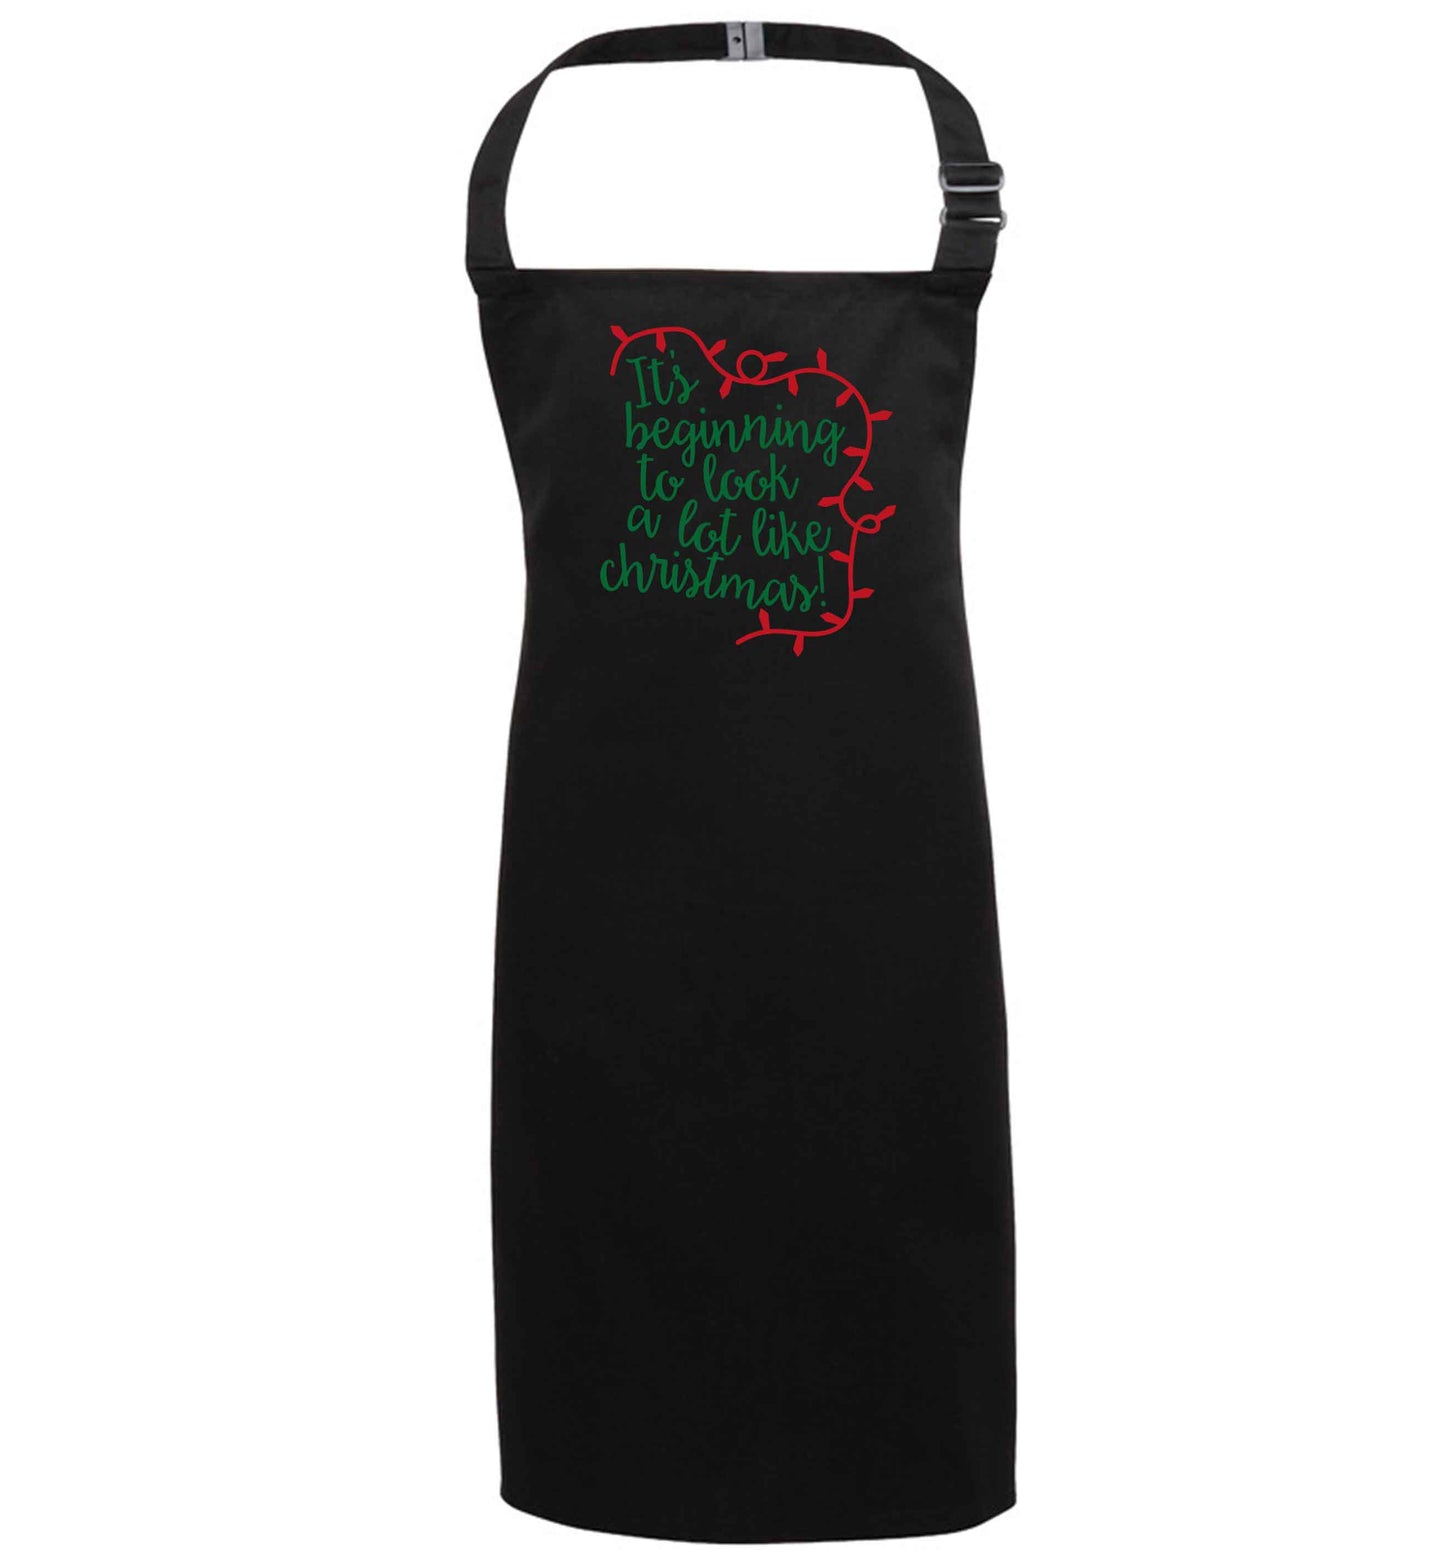 It's beginning to look a lot like Christmas black apron 7-10 years